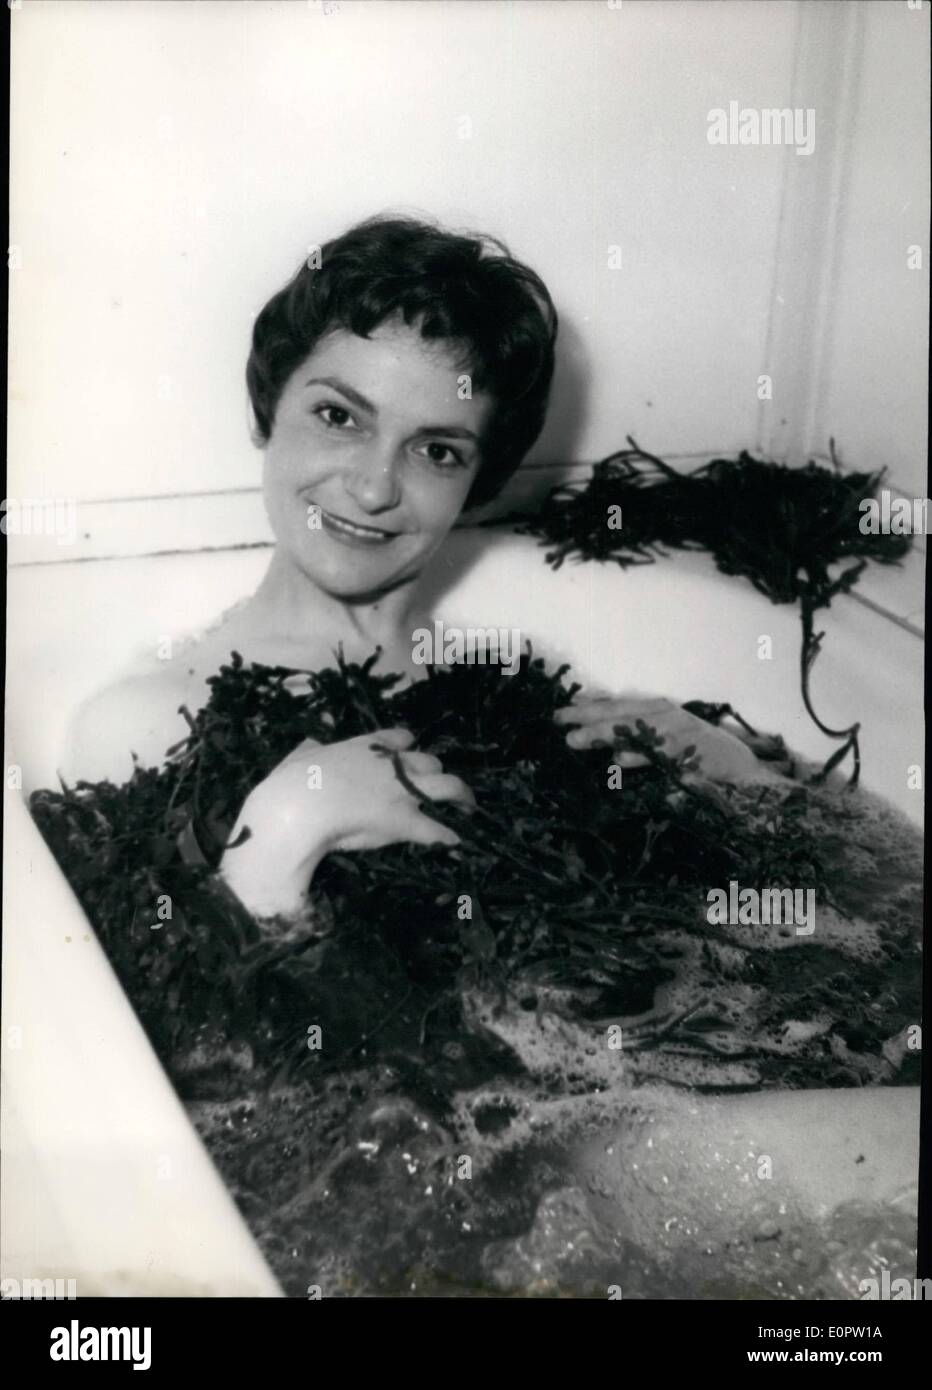 Mar. 03, 1957 - Starlet: Nothing like seaweed bath to keep fit: Nathalie Keryan, the young Paris stage actress, takes a seaweed Stock Photo